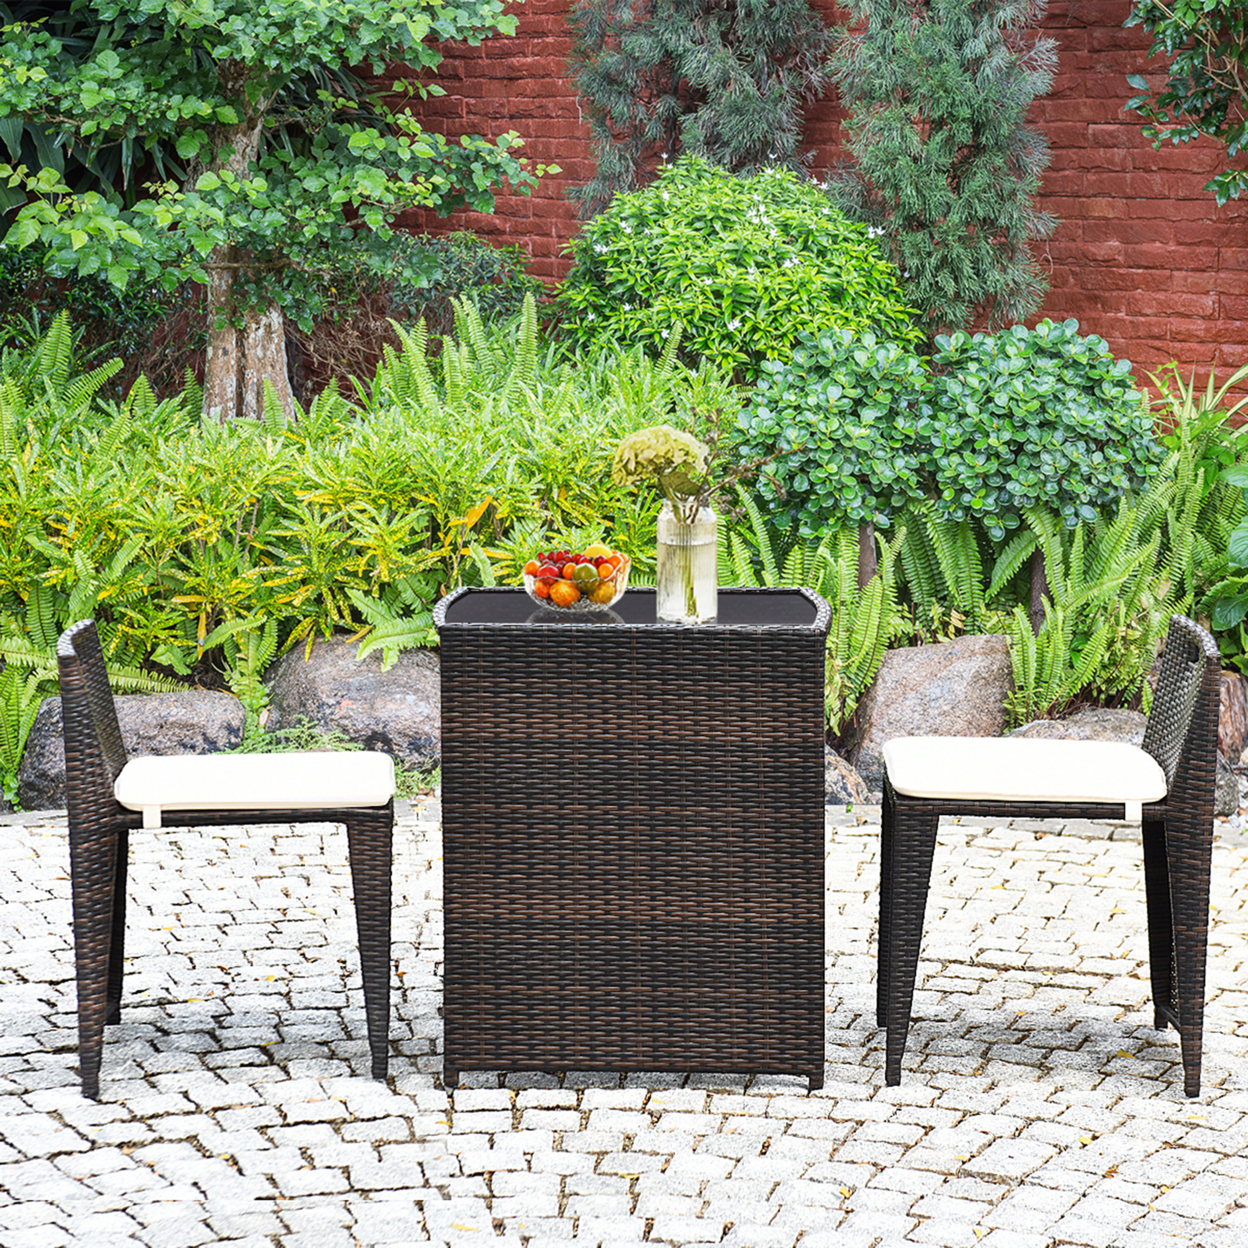 3 PCS Cushioned Wicker Patio Furniture Set Seat Sofa Outdoor No Assembly Brown